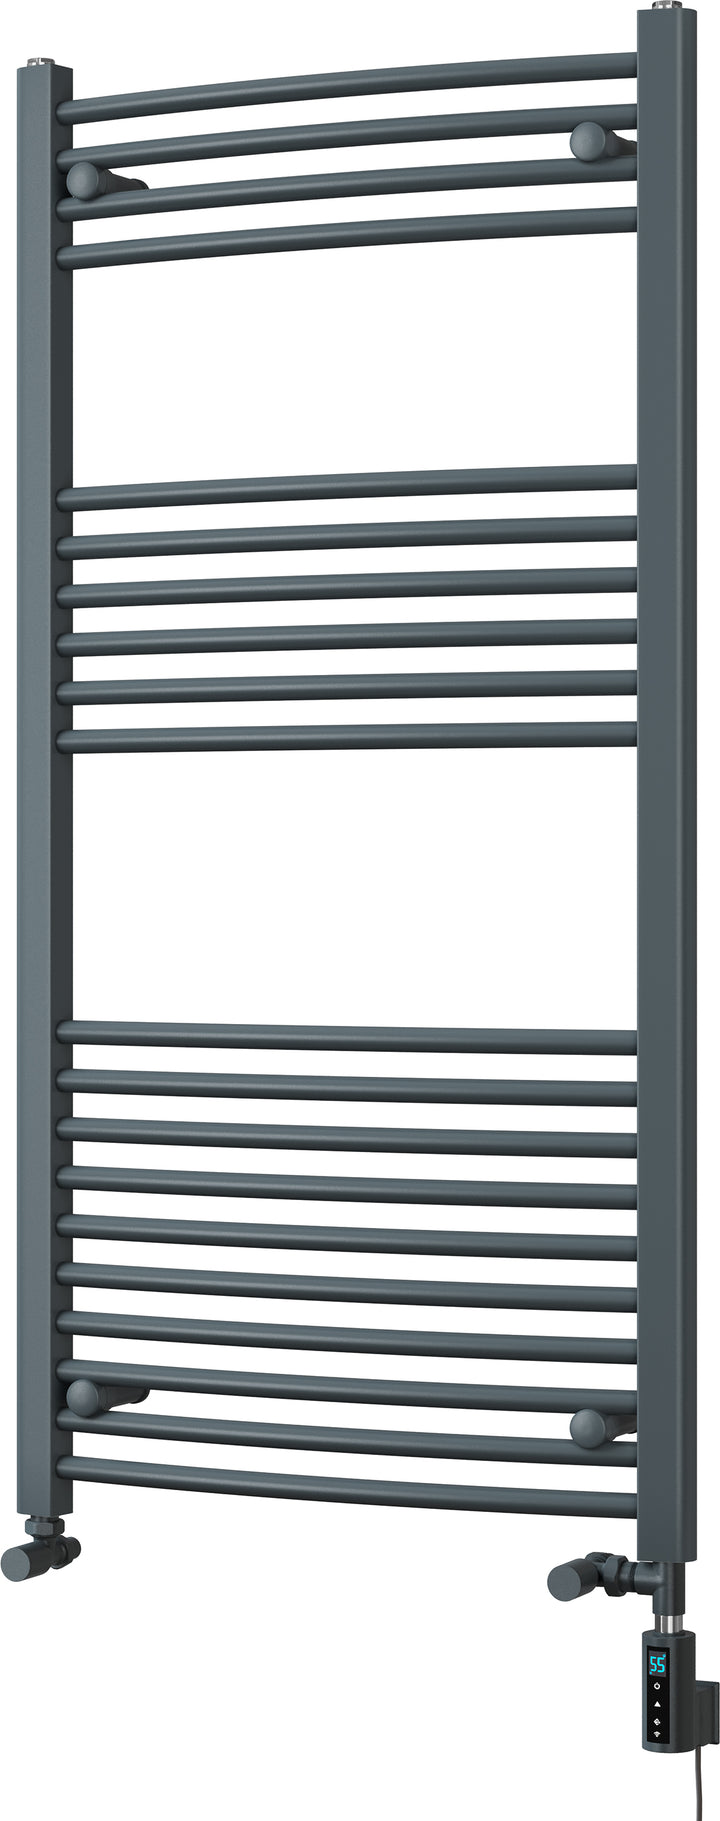 Zennor - Anthracite Dual Fuel Towel Rail  H1200mm x W600mm Thermostatic WIFI - Curved